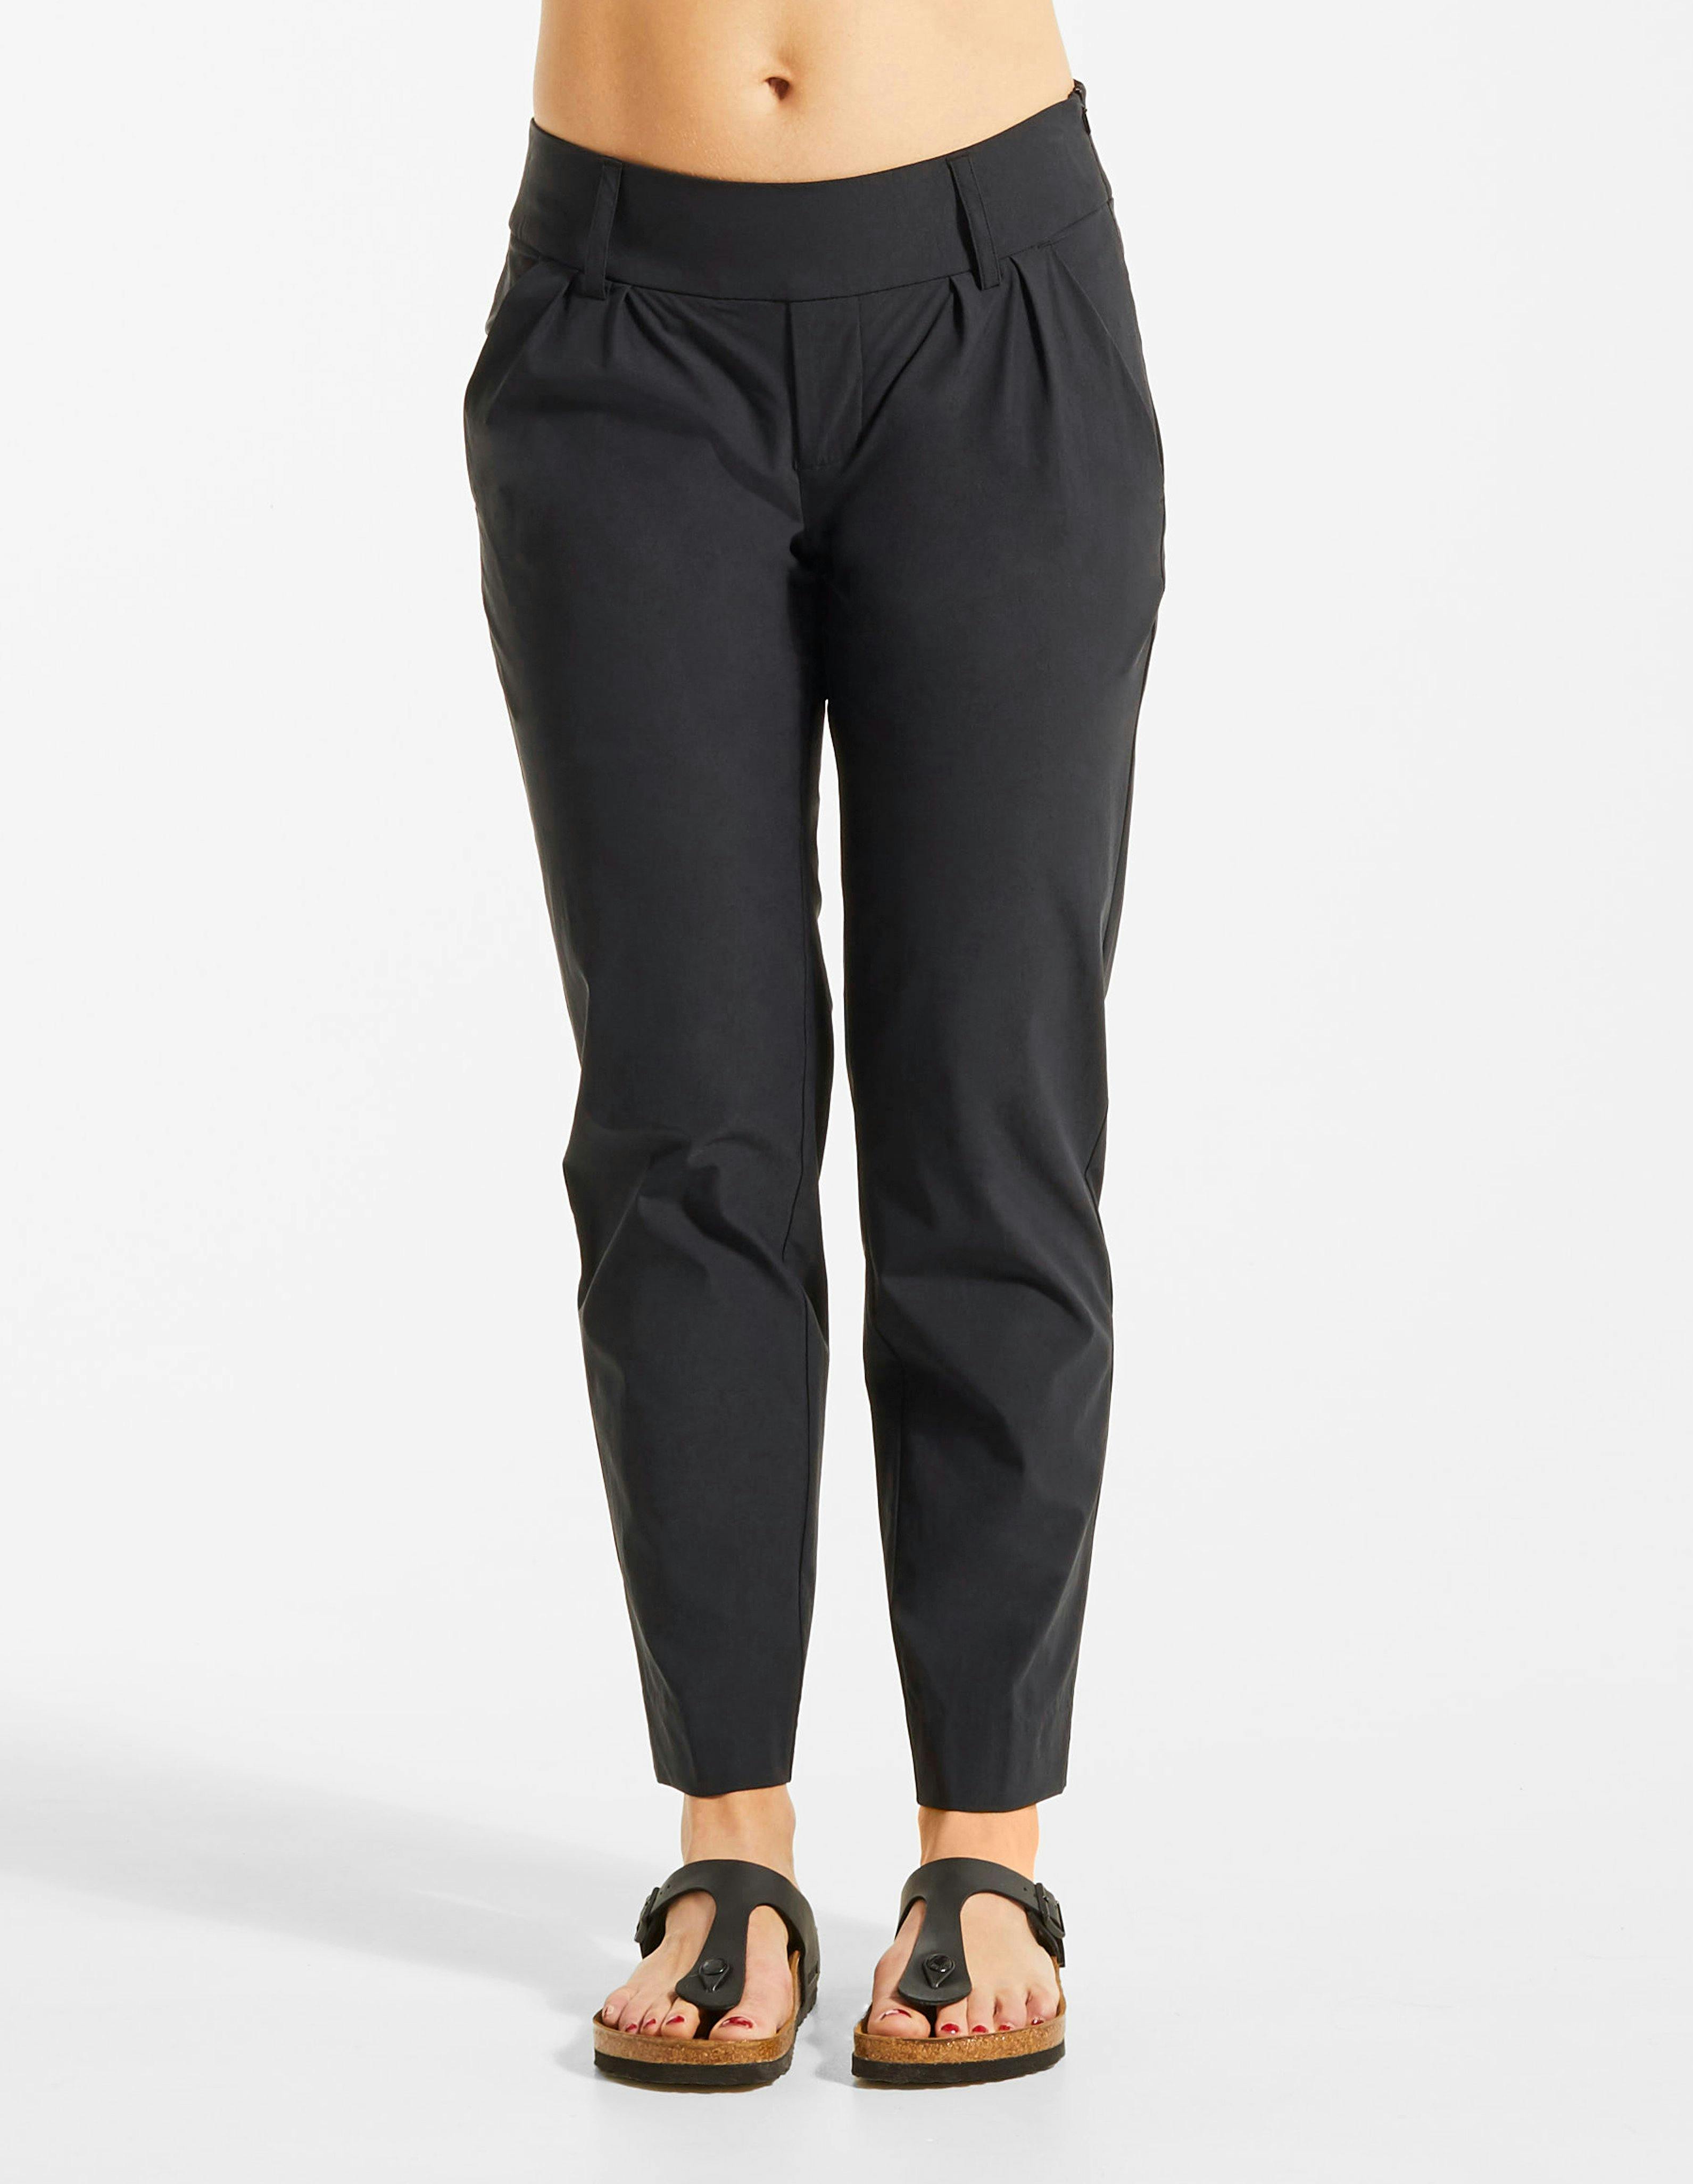 Product image for JAG Pants - Women's